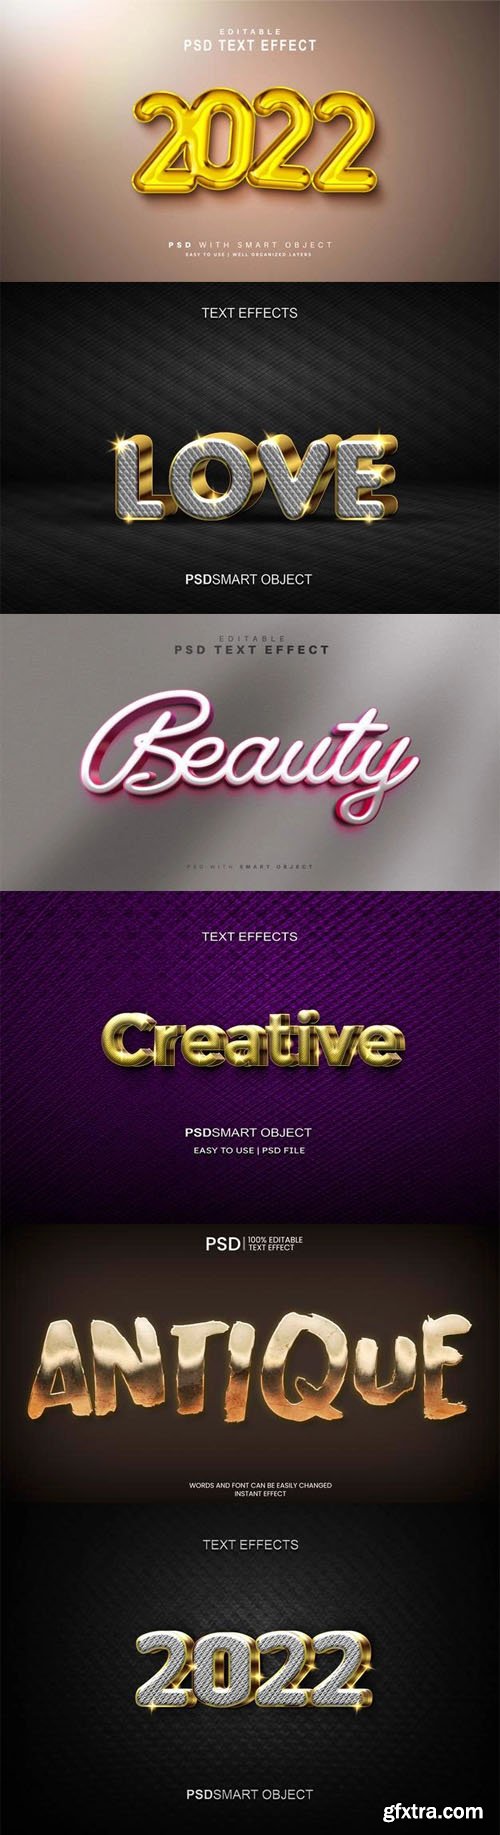 Realistic & Creative Text Effects Collection - 10+ PSD Templates 